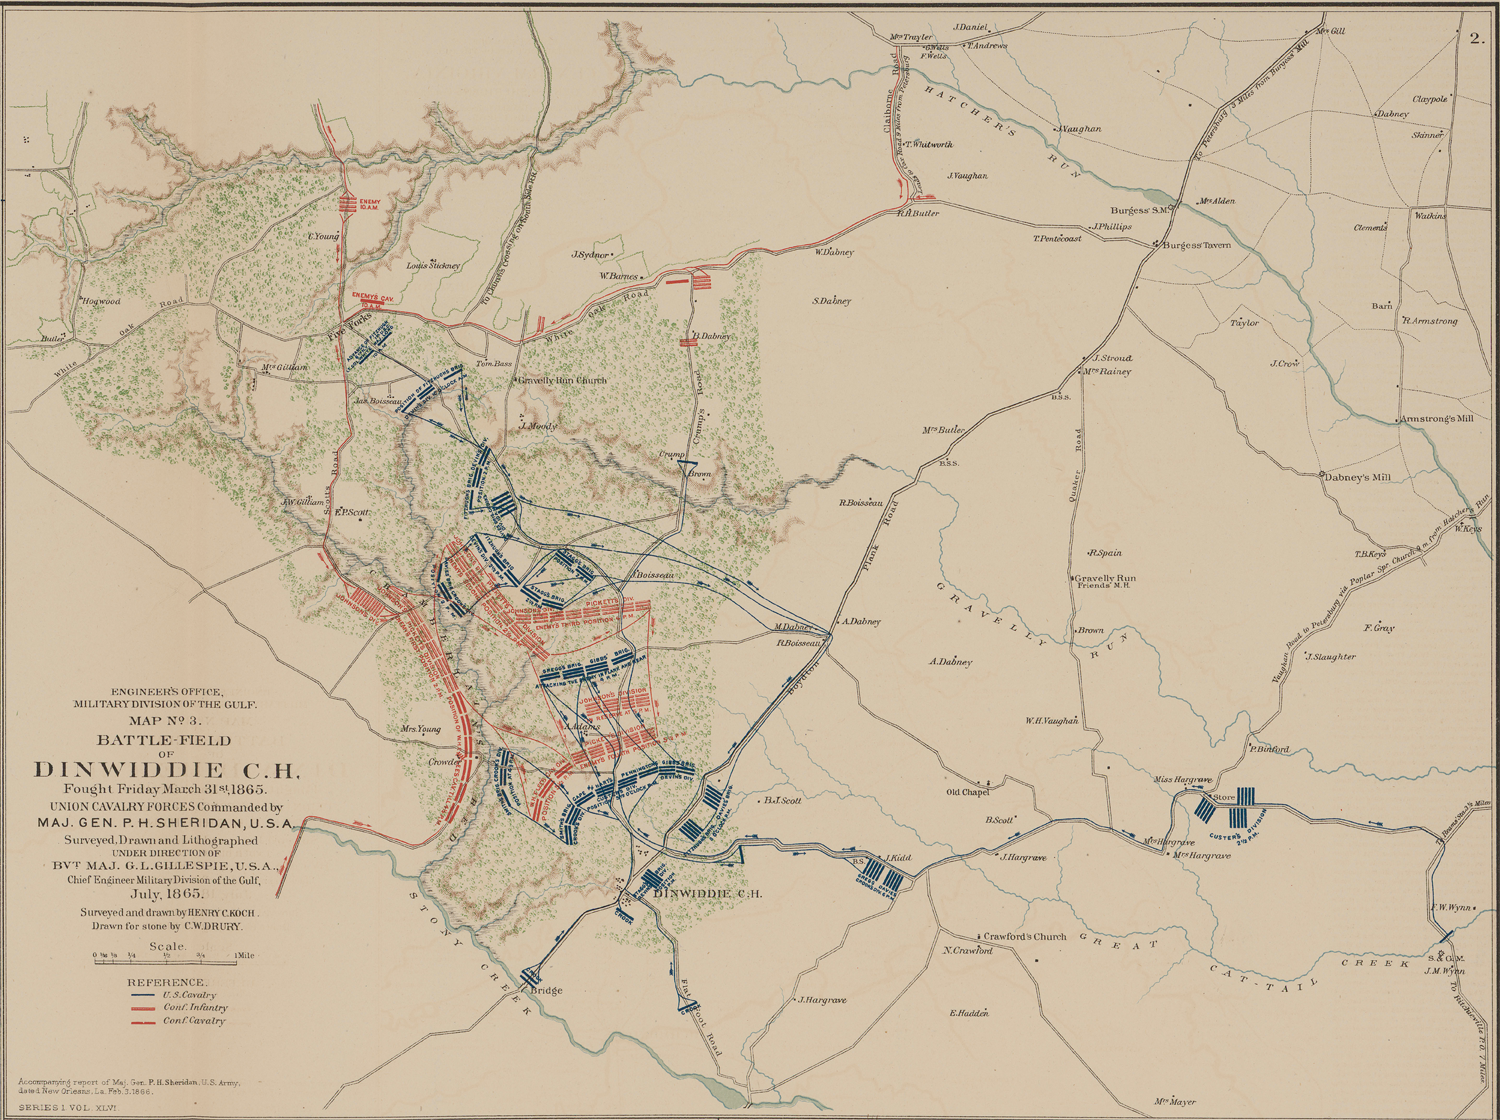 Map No 3 Battle-Field of Dinwiddie C.H. Fought Friday March 31st, 1865 (OR Atlas 74:2)